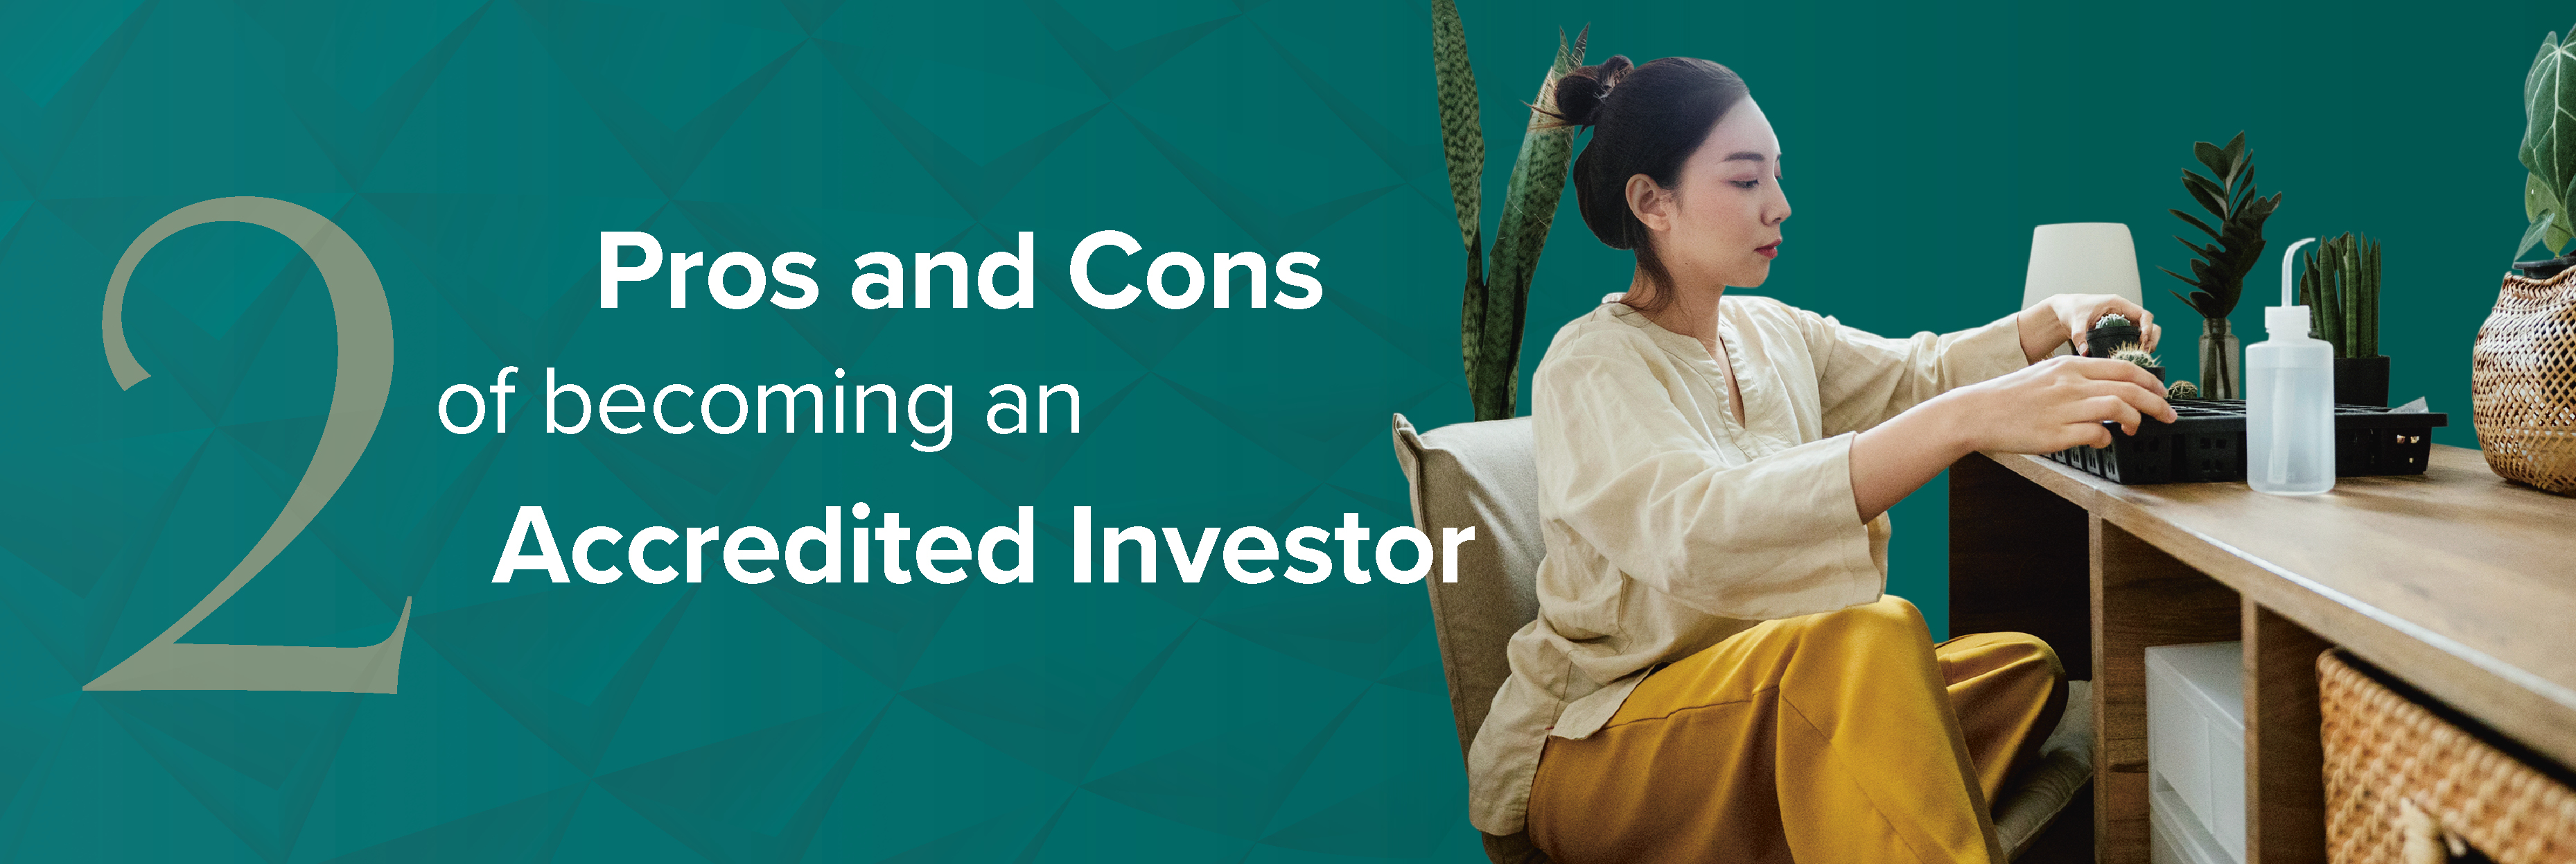 Pros and Cons of becoming an Accredited Investor  